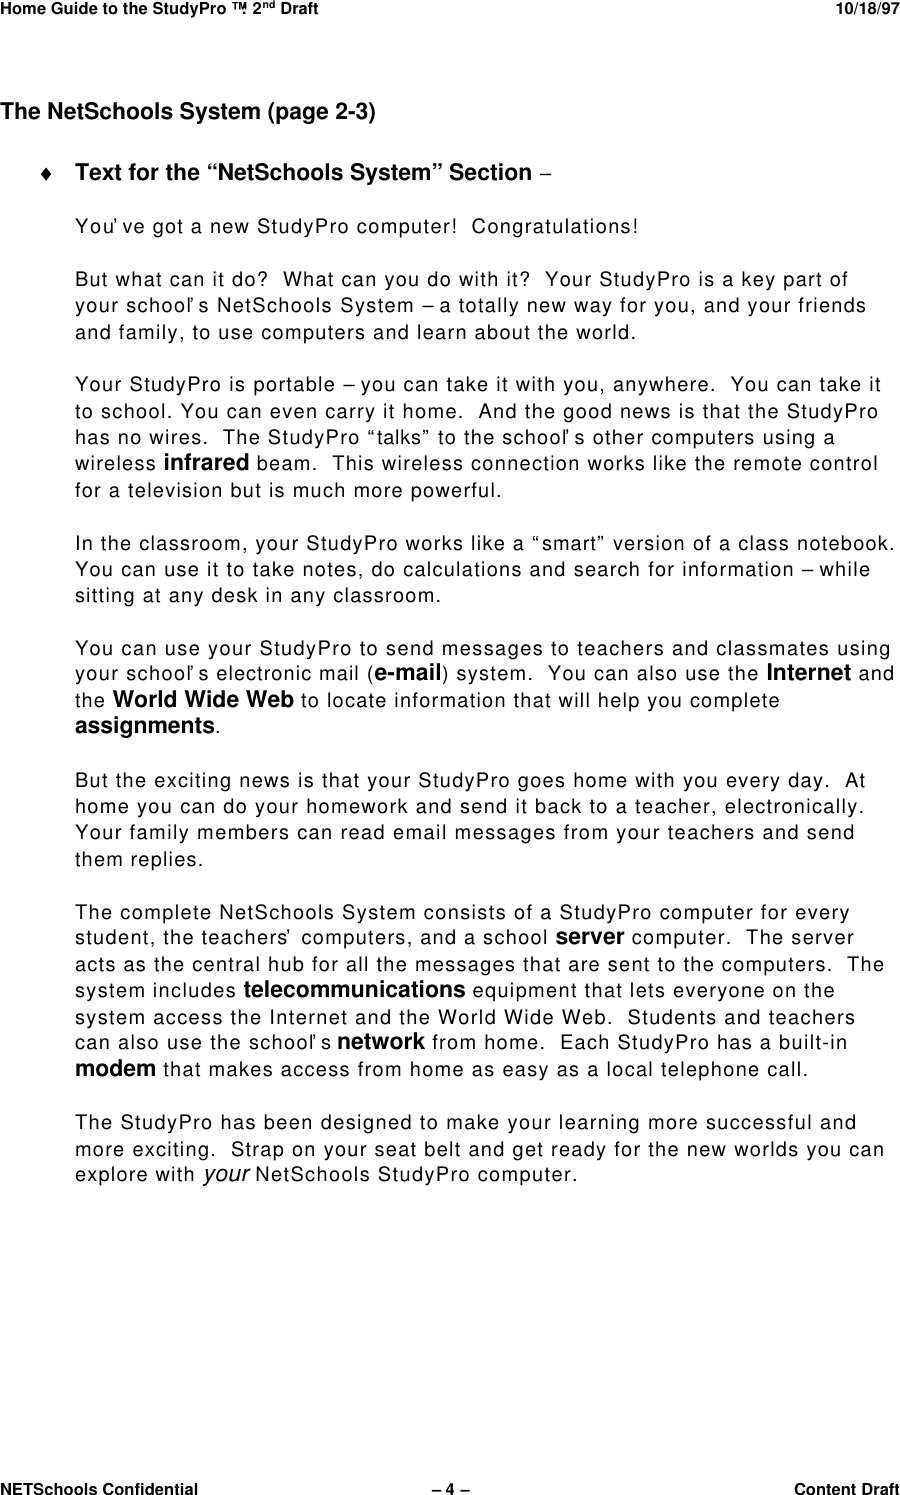 Home Guide to the StudyPro™: 2nd Draft 10/18/97NETSchools Confidential – 4 –Content DraftThe NetSchools System (page 2-3)♦ Text for the “NetSchools System” Section –You’ve got a new StudyPro computer!  Congratulations!But what can it do?  What can you do with it?  Your StudyPro is a key part ofyour school’s NetSchools System – a totally new way for you, and your friendsand family, to use computers and learn about the world.Your StudyPro is portable – you can take it with you, anywhere.  You can take itto school. You can even carry it home.  And the good news is that the StudyProhas no wires.  The StudyPro “talks” to the school’s other computers using awireless infrared beam.  This wireless connection works like the remote controlfor a television but is much more powerful.In the classroom, your StudyPro works like a “smart” version of a class notebook.You can use it to take notes, do calculations and search for information – whilesitting at any desk in any classroom.You can use your StudyPro to send messages to teachers and classmates usingyour school’s electronic mail (e-mail) system.  You can also use the Internet andthe World Wide Web to locate information that will help you completeassignments.But the exciting news is that your StudyPro goes home with you every day.  Athome you can do your homework and send it back to a teacher, electronically.Your family members can read email messages from your teachers and sendthem replies.The complete NetSchools System consists of a StudyPro computer for everystudent, the teachers’ computers, and a school server computer.  The serveracts as the central hub for all the messages that are sent to the computers.  Thesystem includes telecommunications equipment that lets everyone on thesystem access the Internet and the World Wide Web.  Students and teacherscan also use the school’s network from home.  Each StudyPro has a built-inmodem that makes access from home as easy as a local telephone call.The StudyPro has been designed to make your learning more successful andmore exciting.  Strap on your seat belt and get ready for the new worlds you canexplore with your NetSchools StudyPro computer.